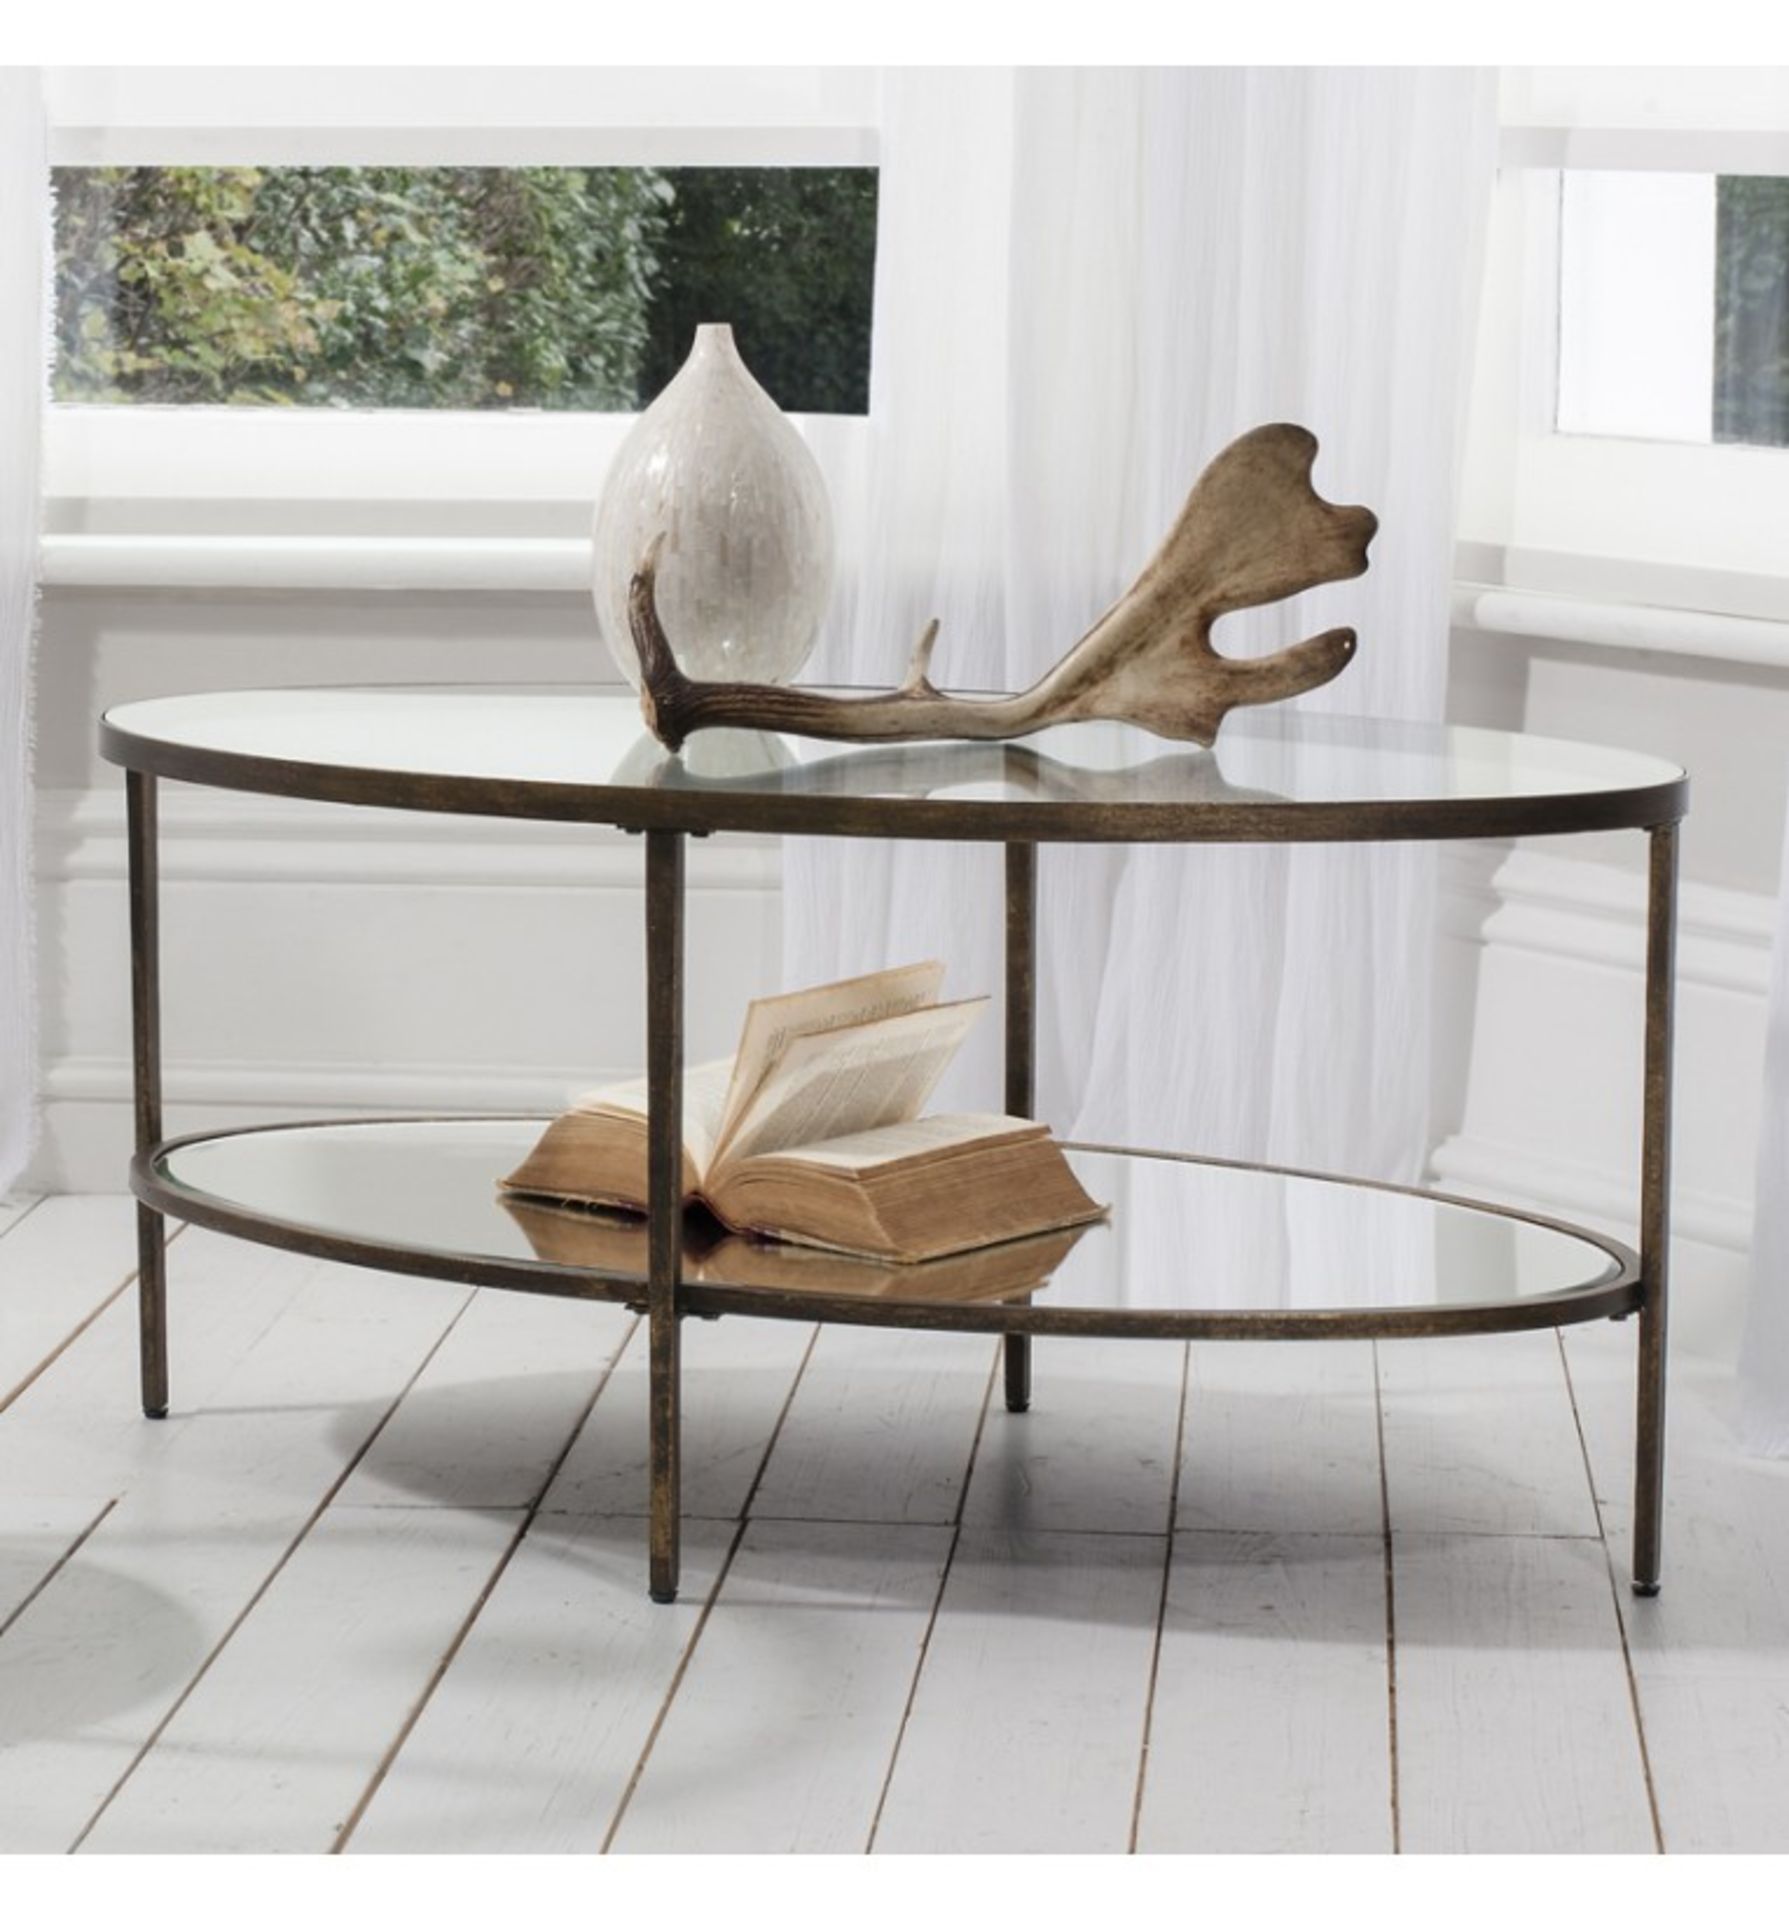 Hudson Coffee Table Champagne Add a splash of Scandi style to your home with the Hudson oval